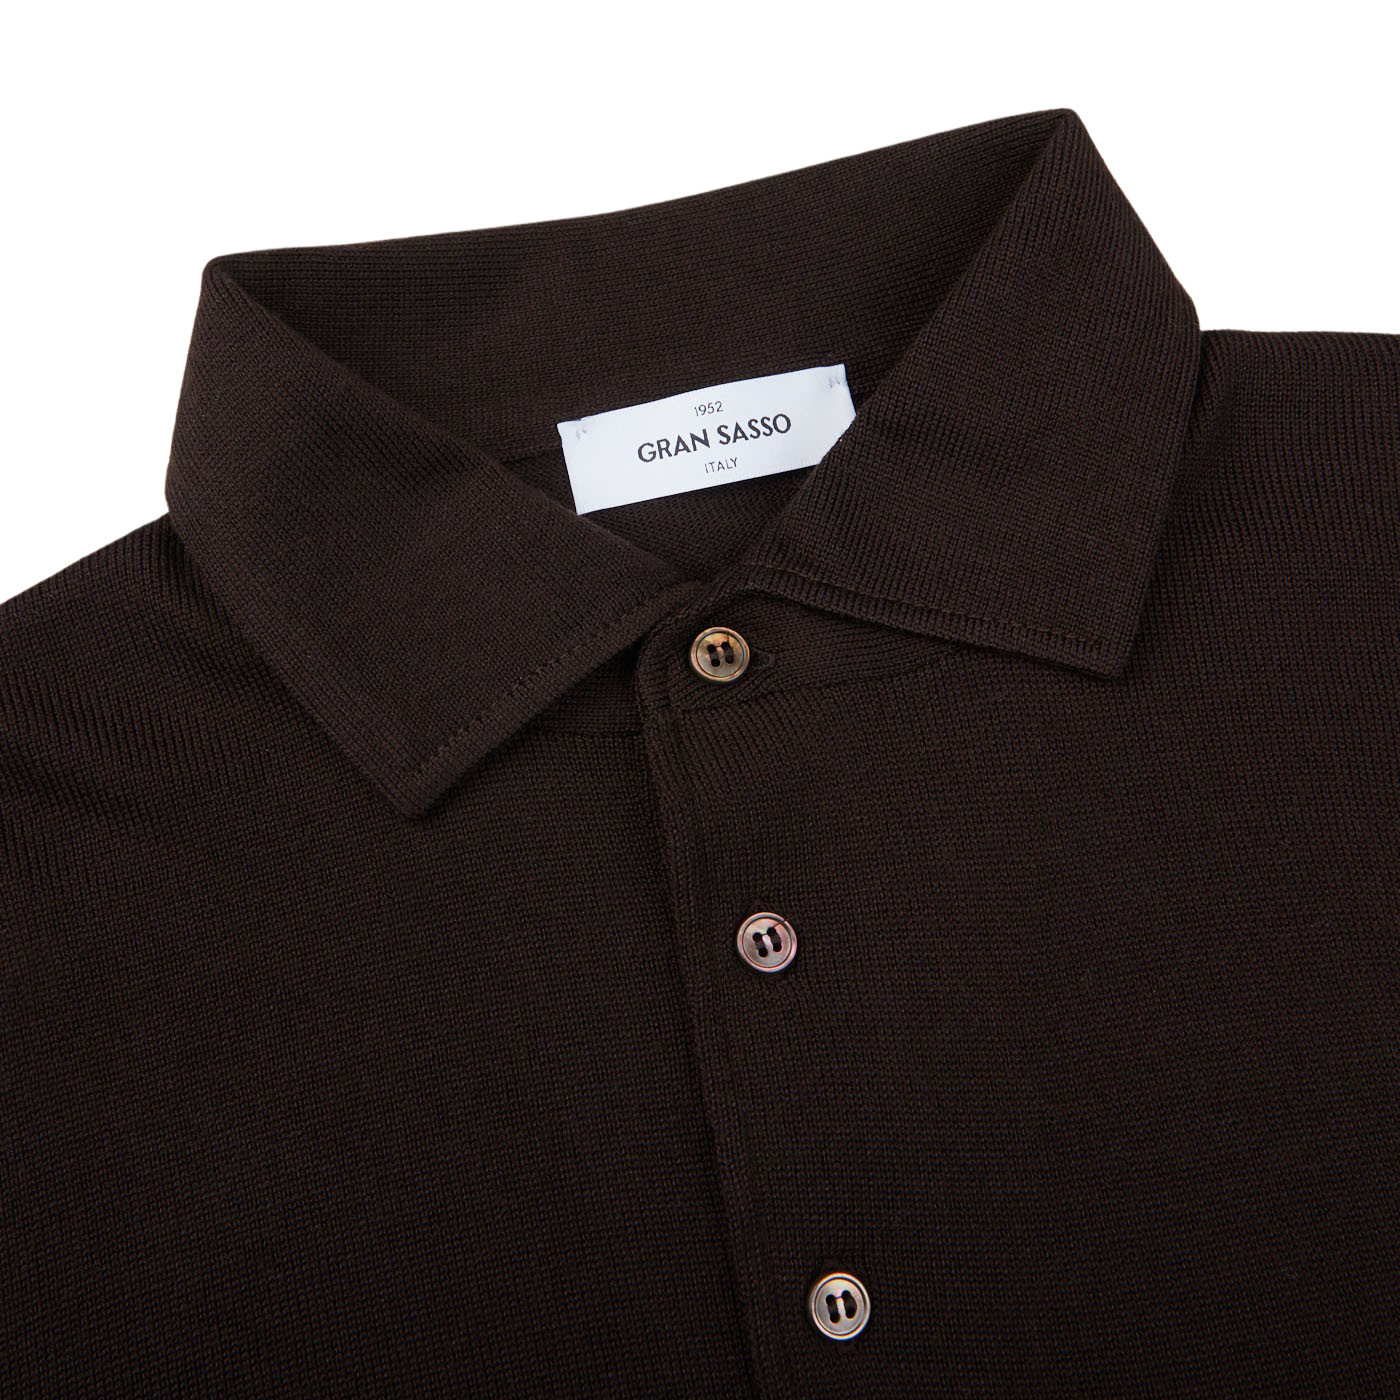 A close up of a dark Brown Merino Wool One-Piece Collar Polo Shirt by Gran Sasso.